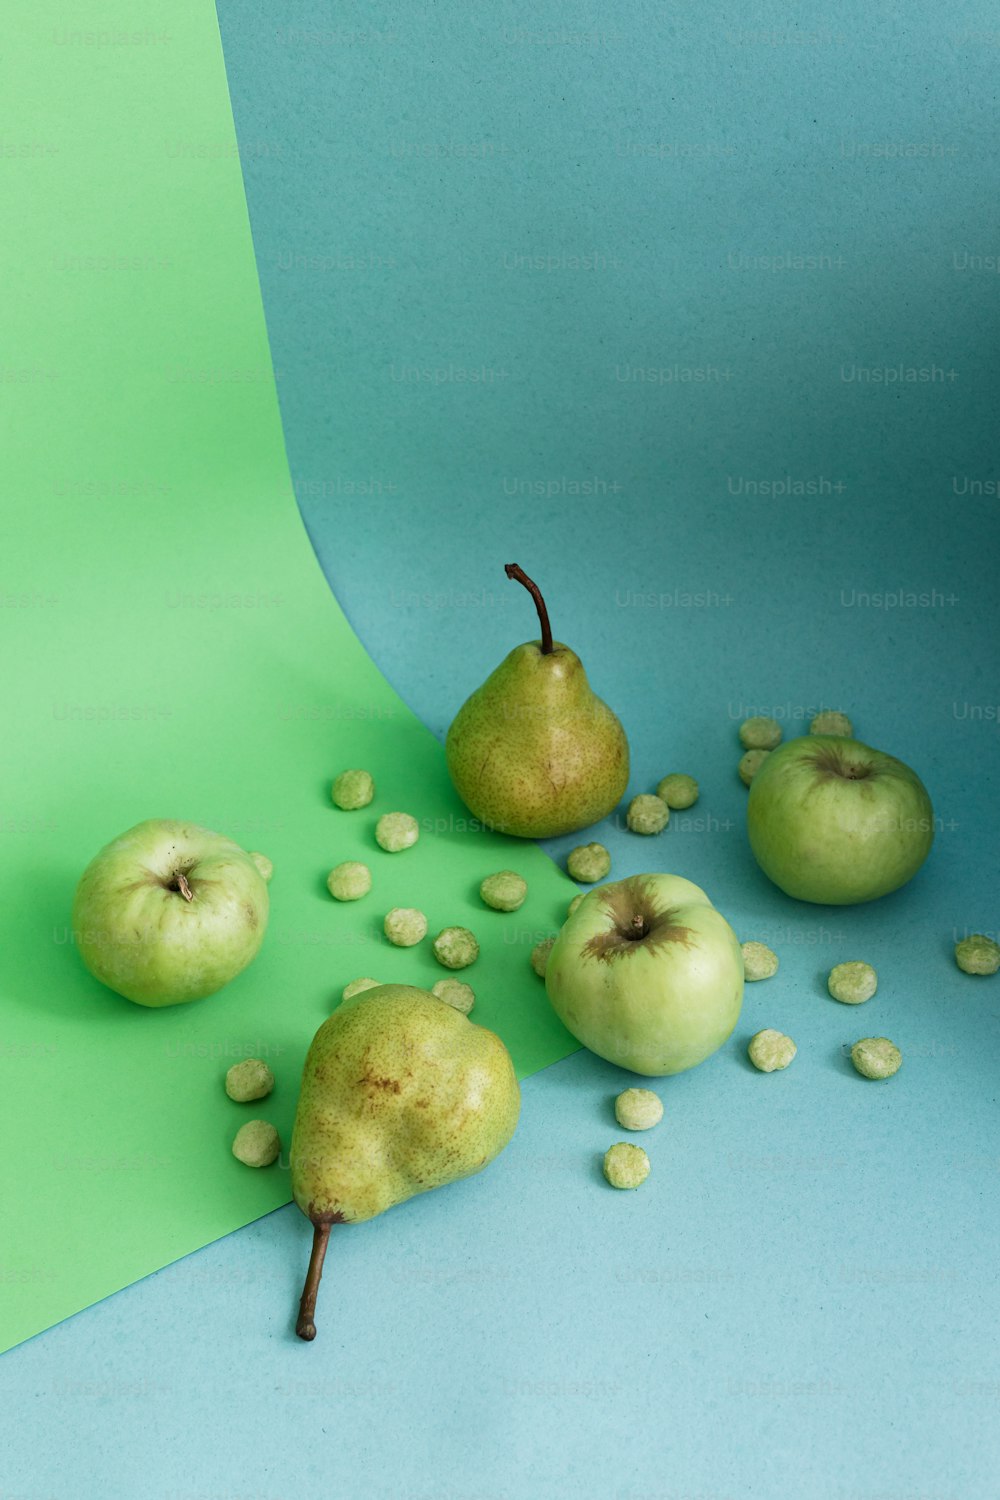 a group of green pears on a blue and green background